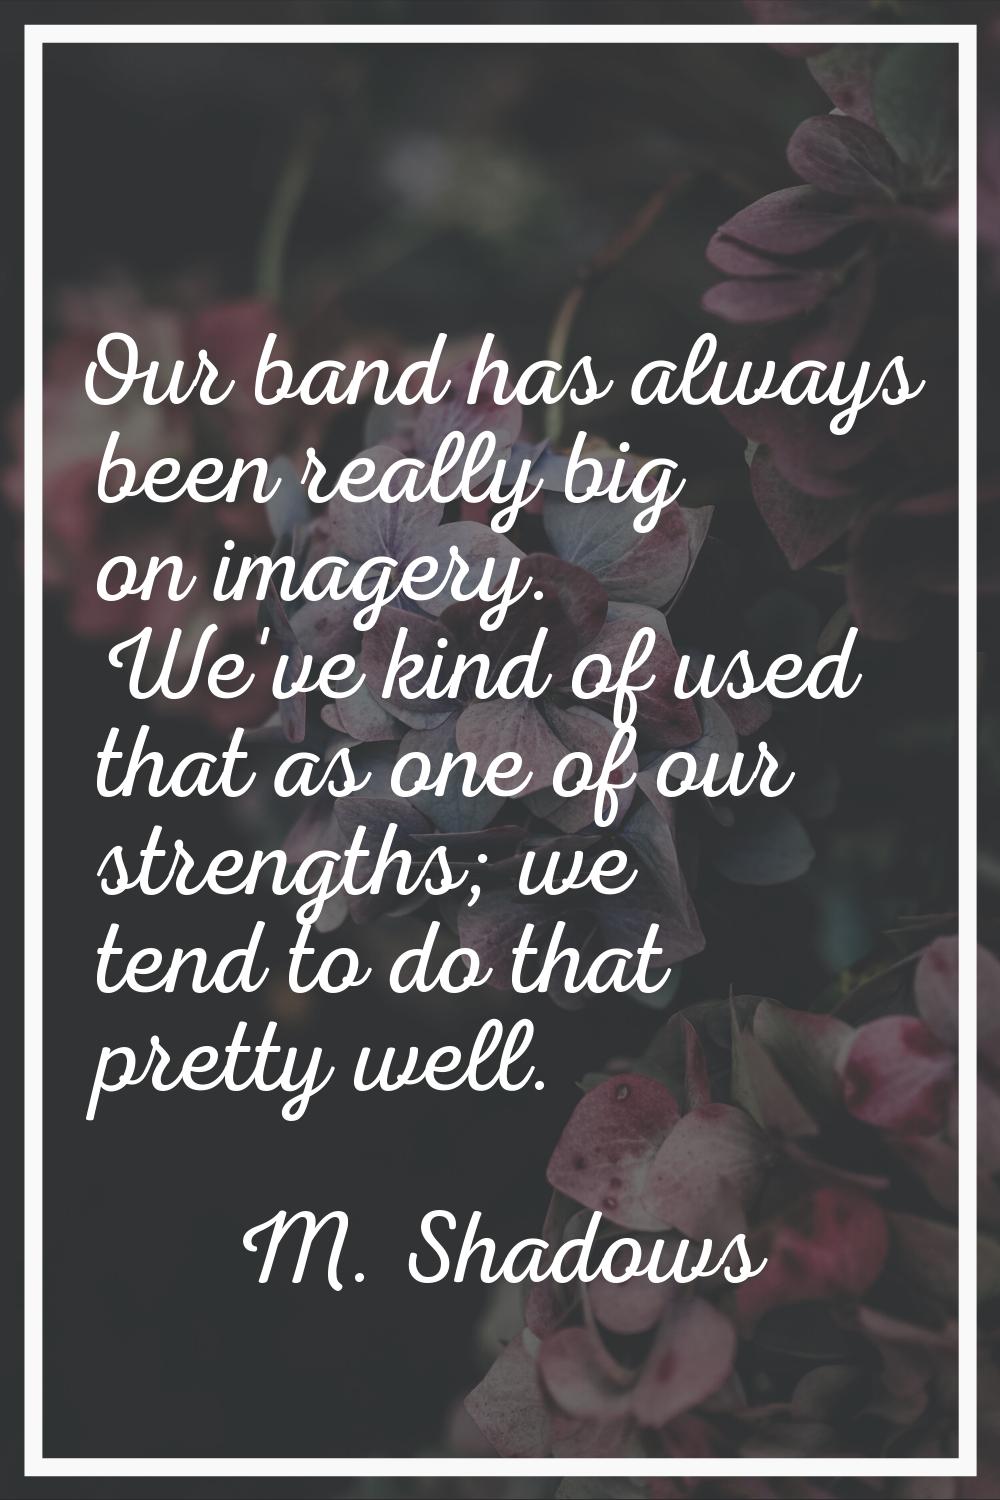 Our band has always been really big on imagery. We've kind of used that as one of our strengths; we